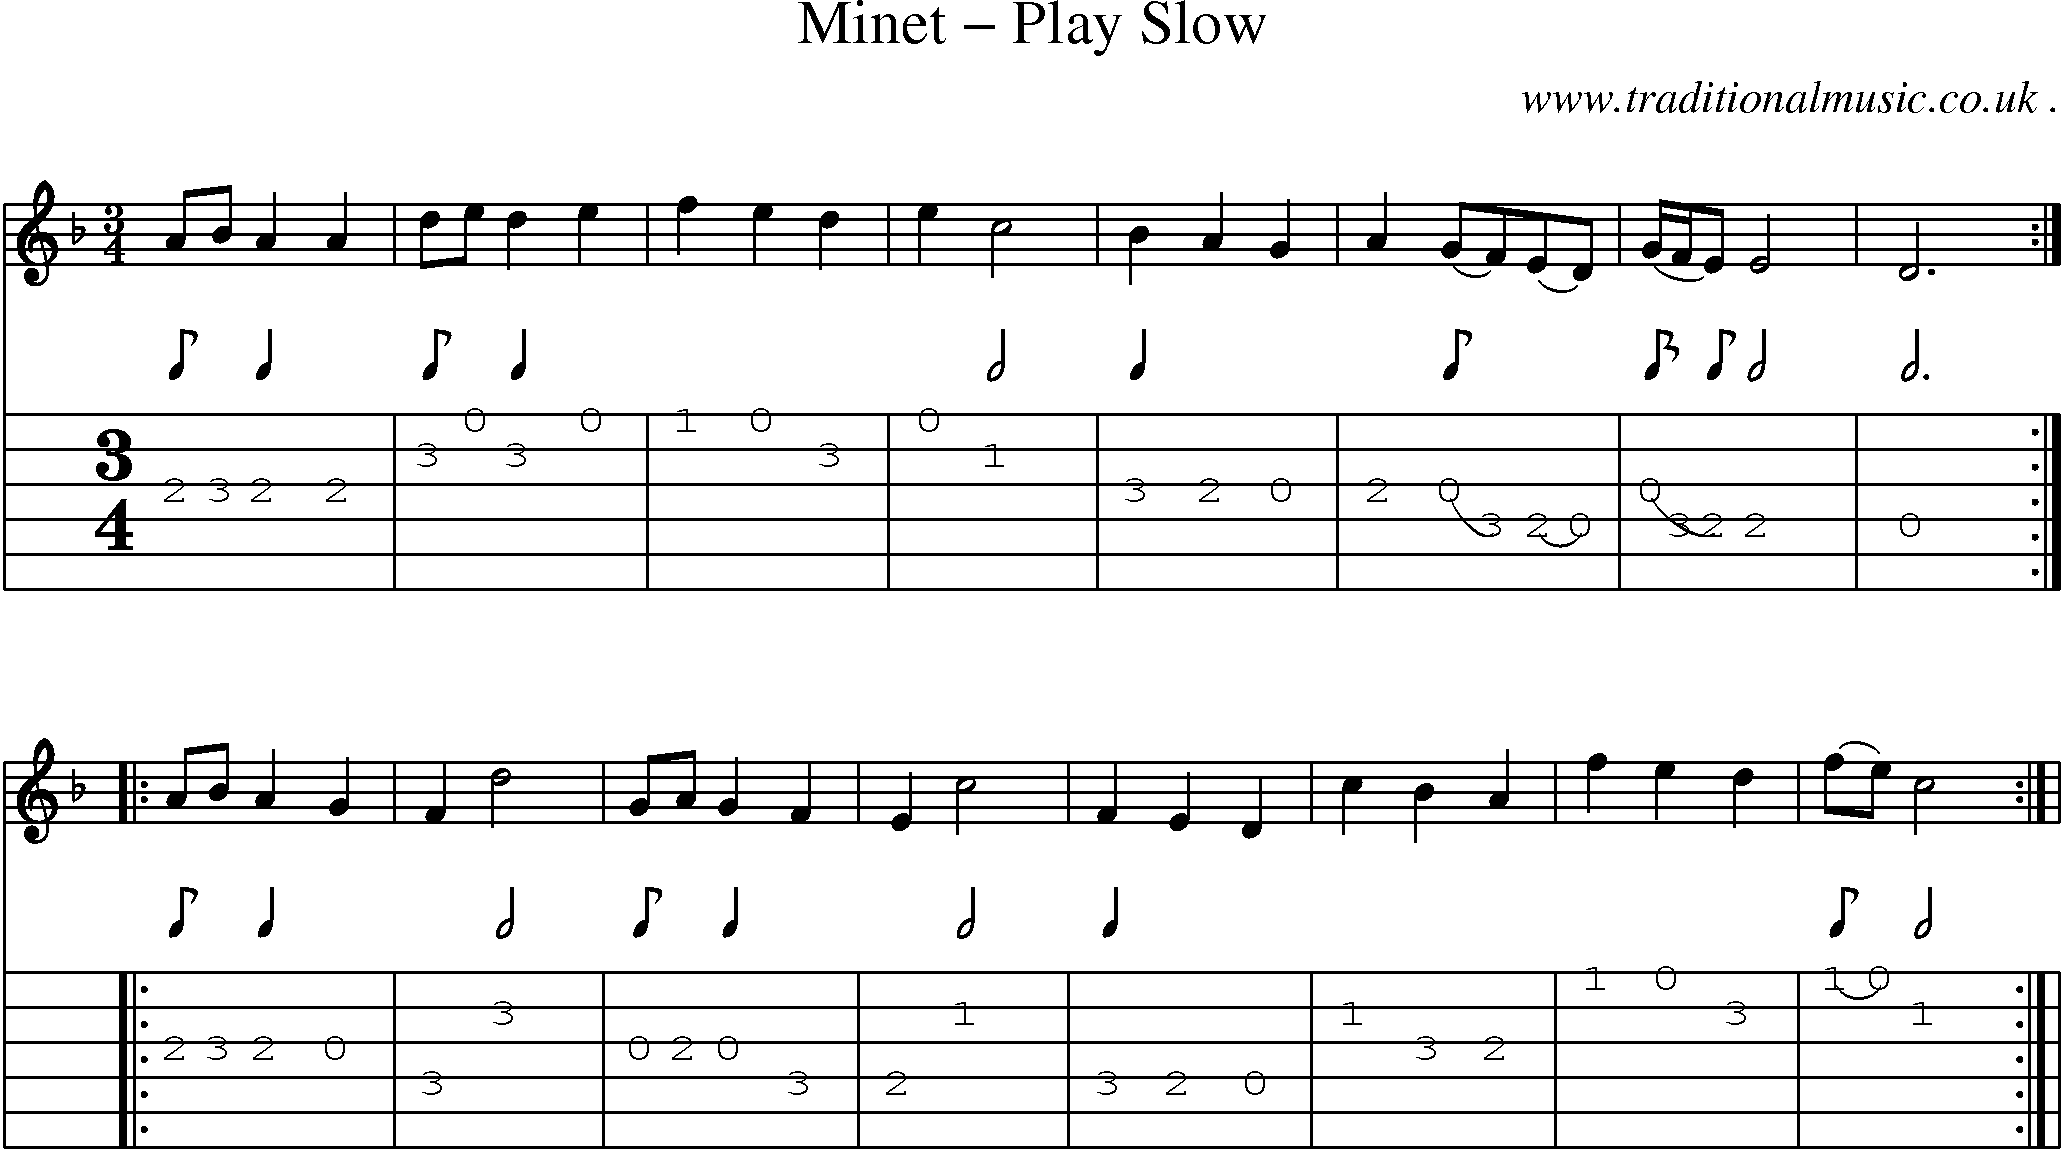 Sheet-Music and Guitar Tabs for Minet Play Slow